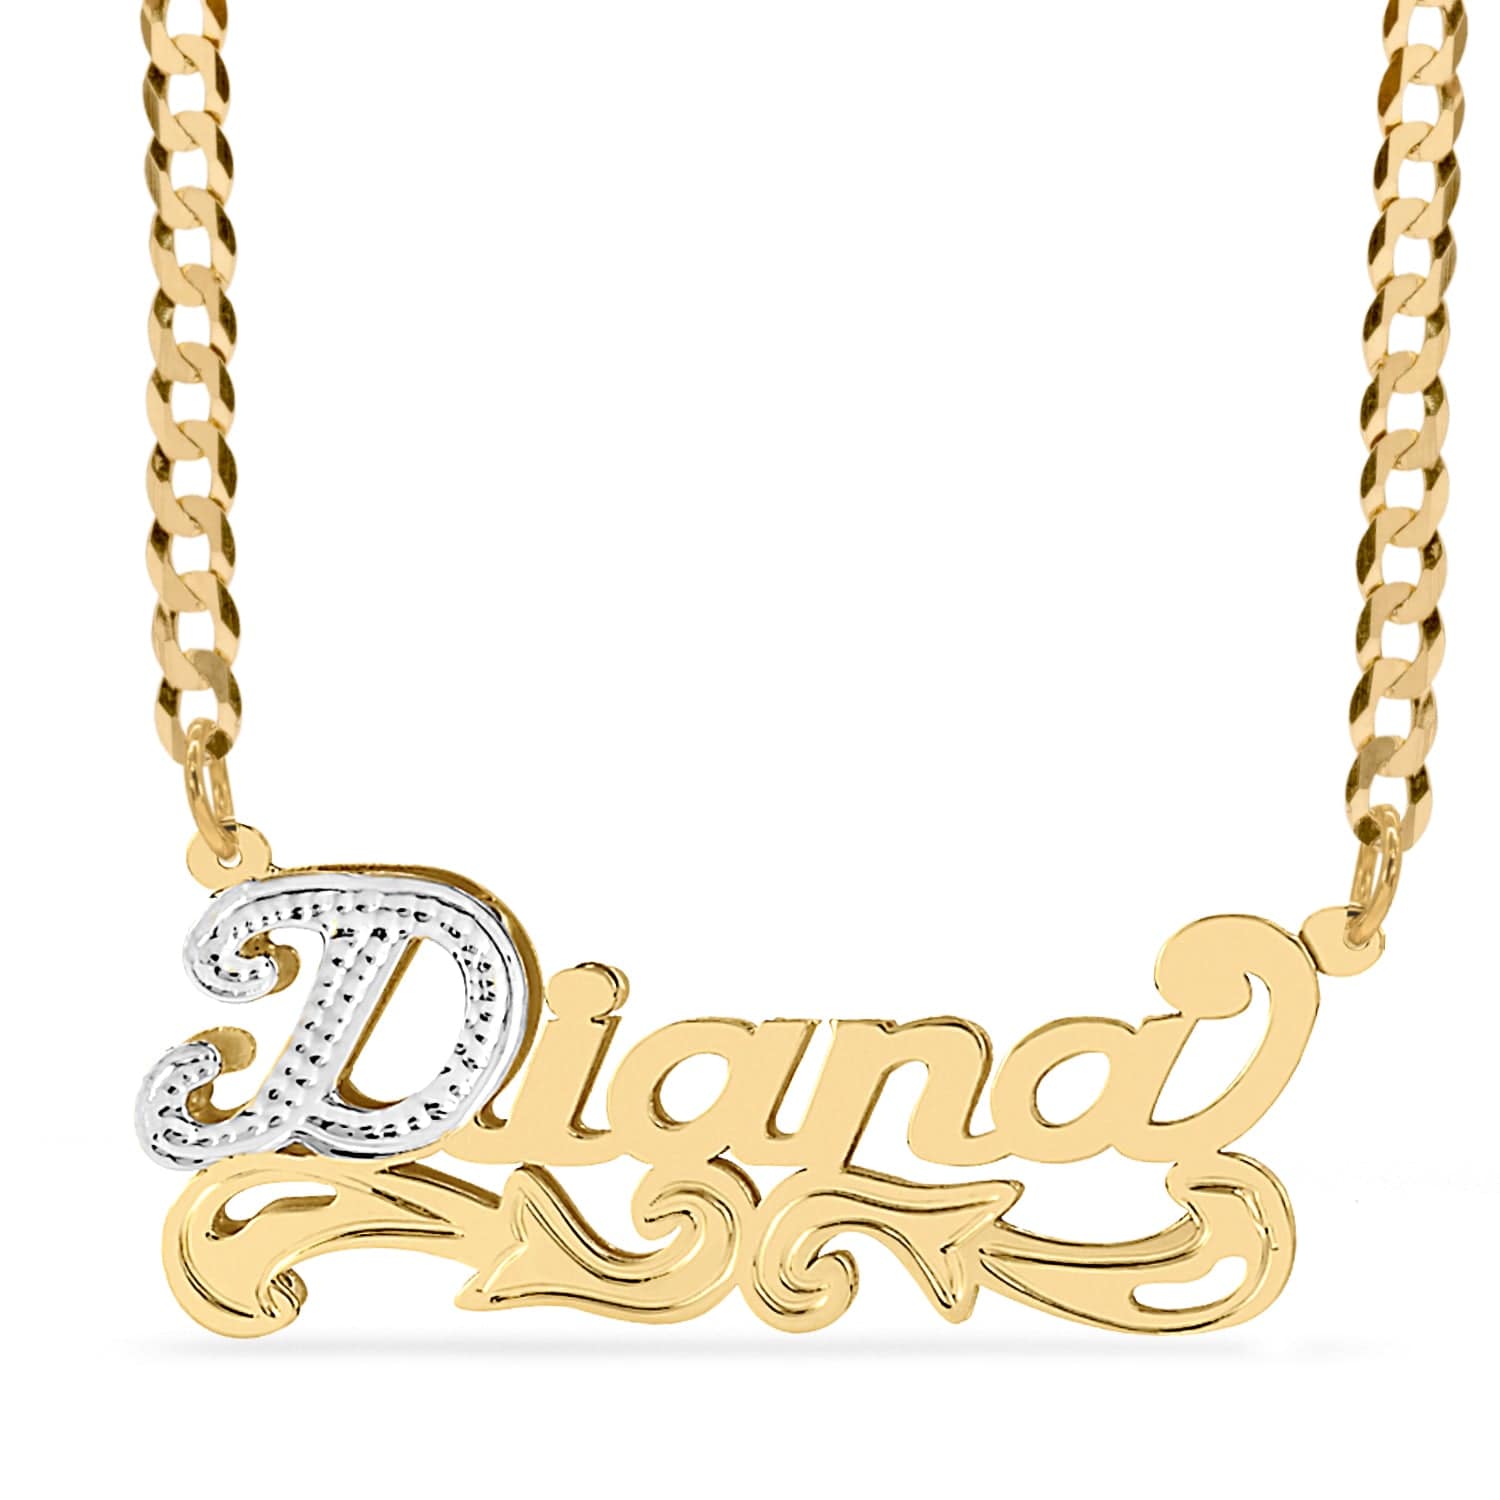 10K Solid Gold / Cuban Chain Solid Gold Double Plated Nameplate Necklace "Diana"